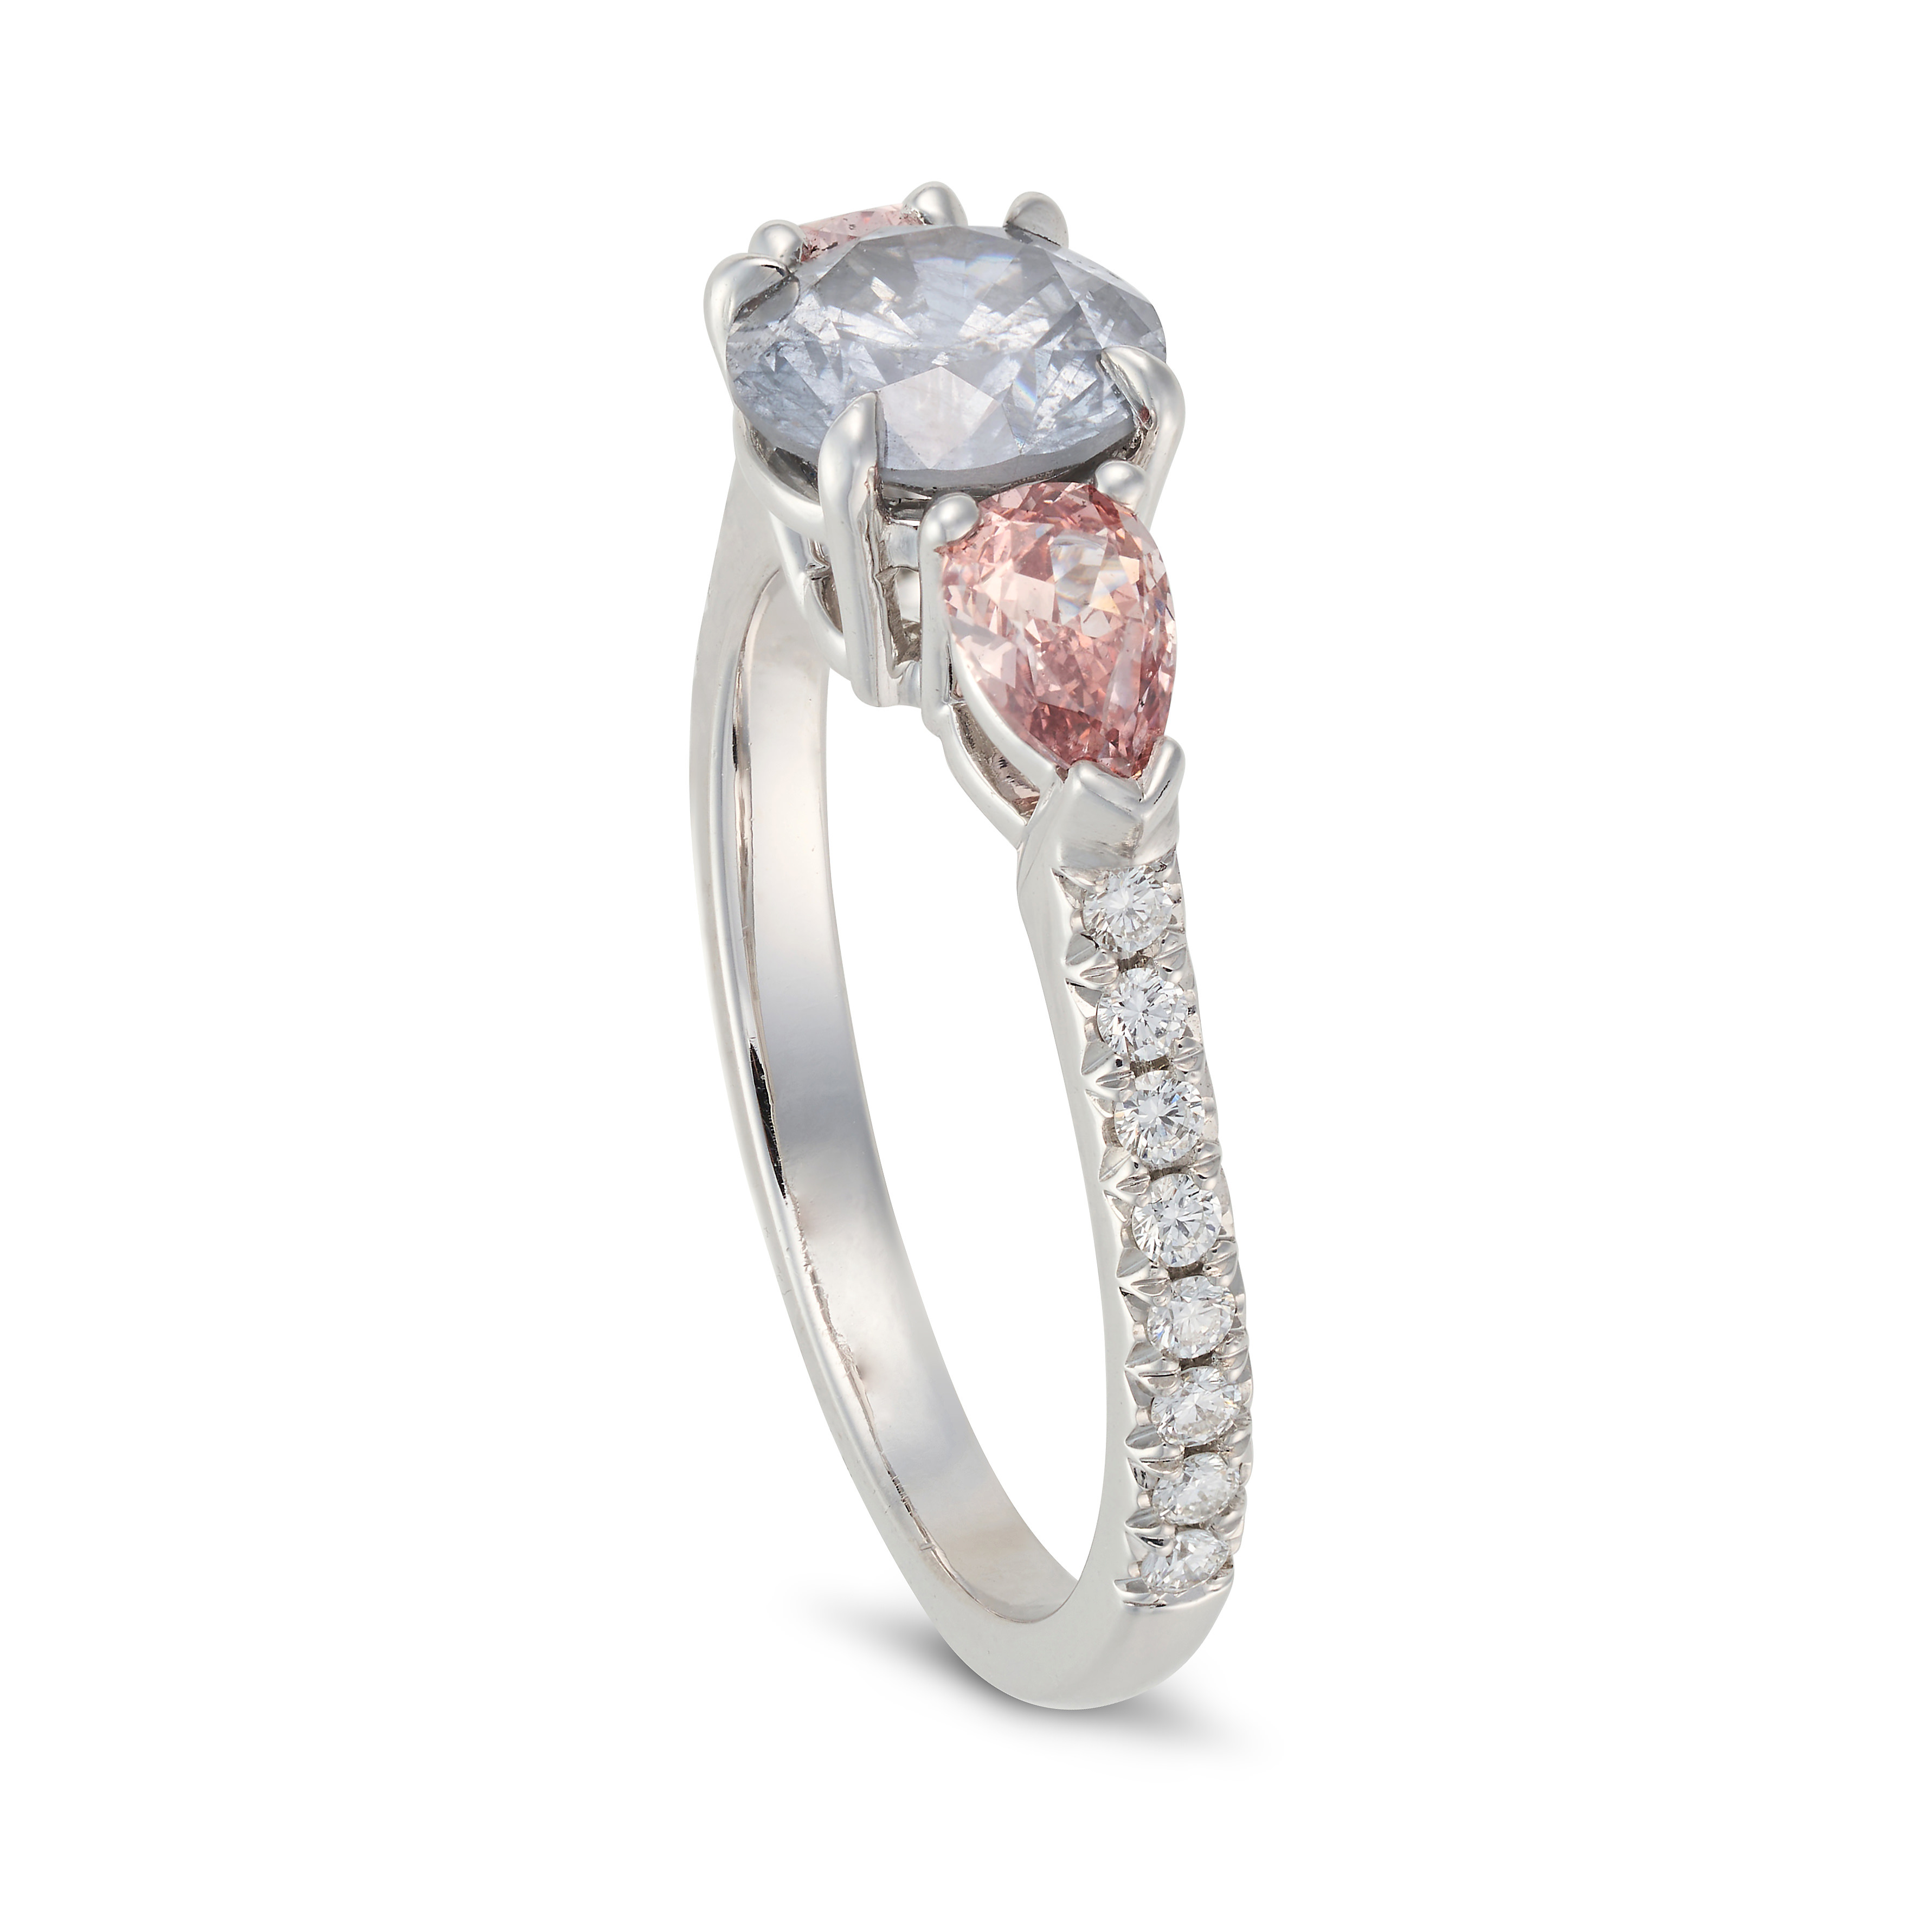 A BLUE AND FANCY ORANGY PINK DIAMOND RING set with a round brilliant cut blue diamond of approxim... - Image 2 of 2